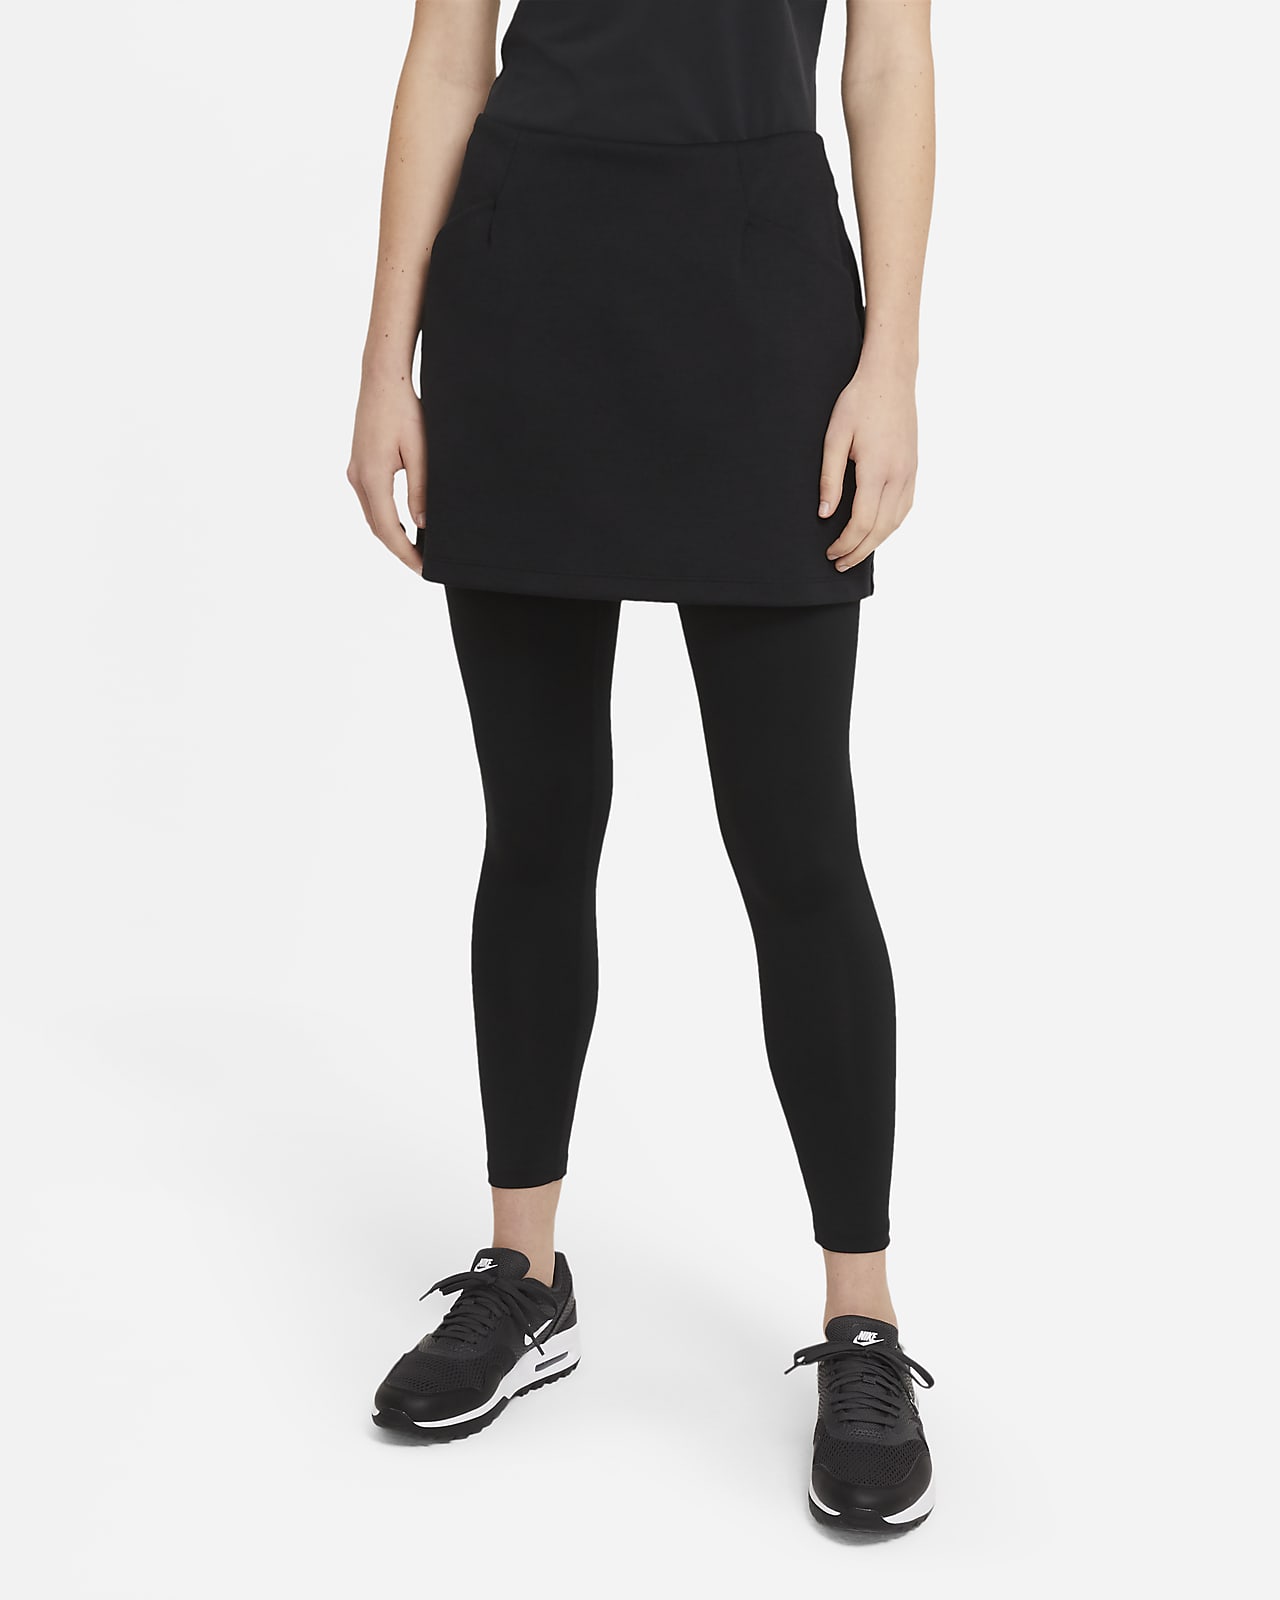 https://static.nike.com/a/images/t_PDP_1280_v1/f_auto,q_auto:eco/7959cb31-b23d-4911-ab06-b8bd0290ae60/dri-fit-uv-womens-2-in-1-golf-skirted-tights-bZvjg0.png